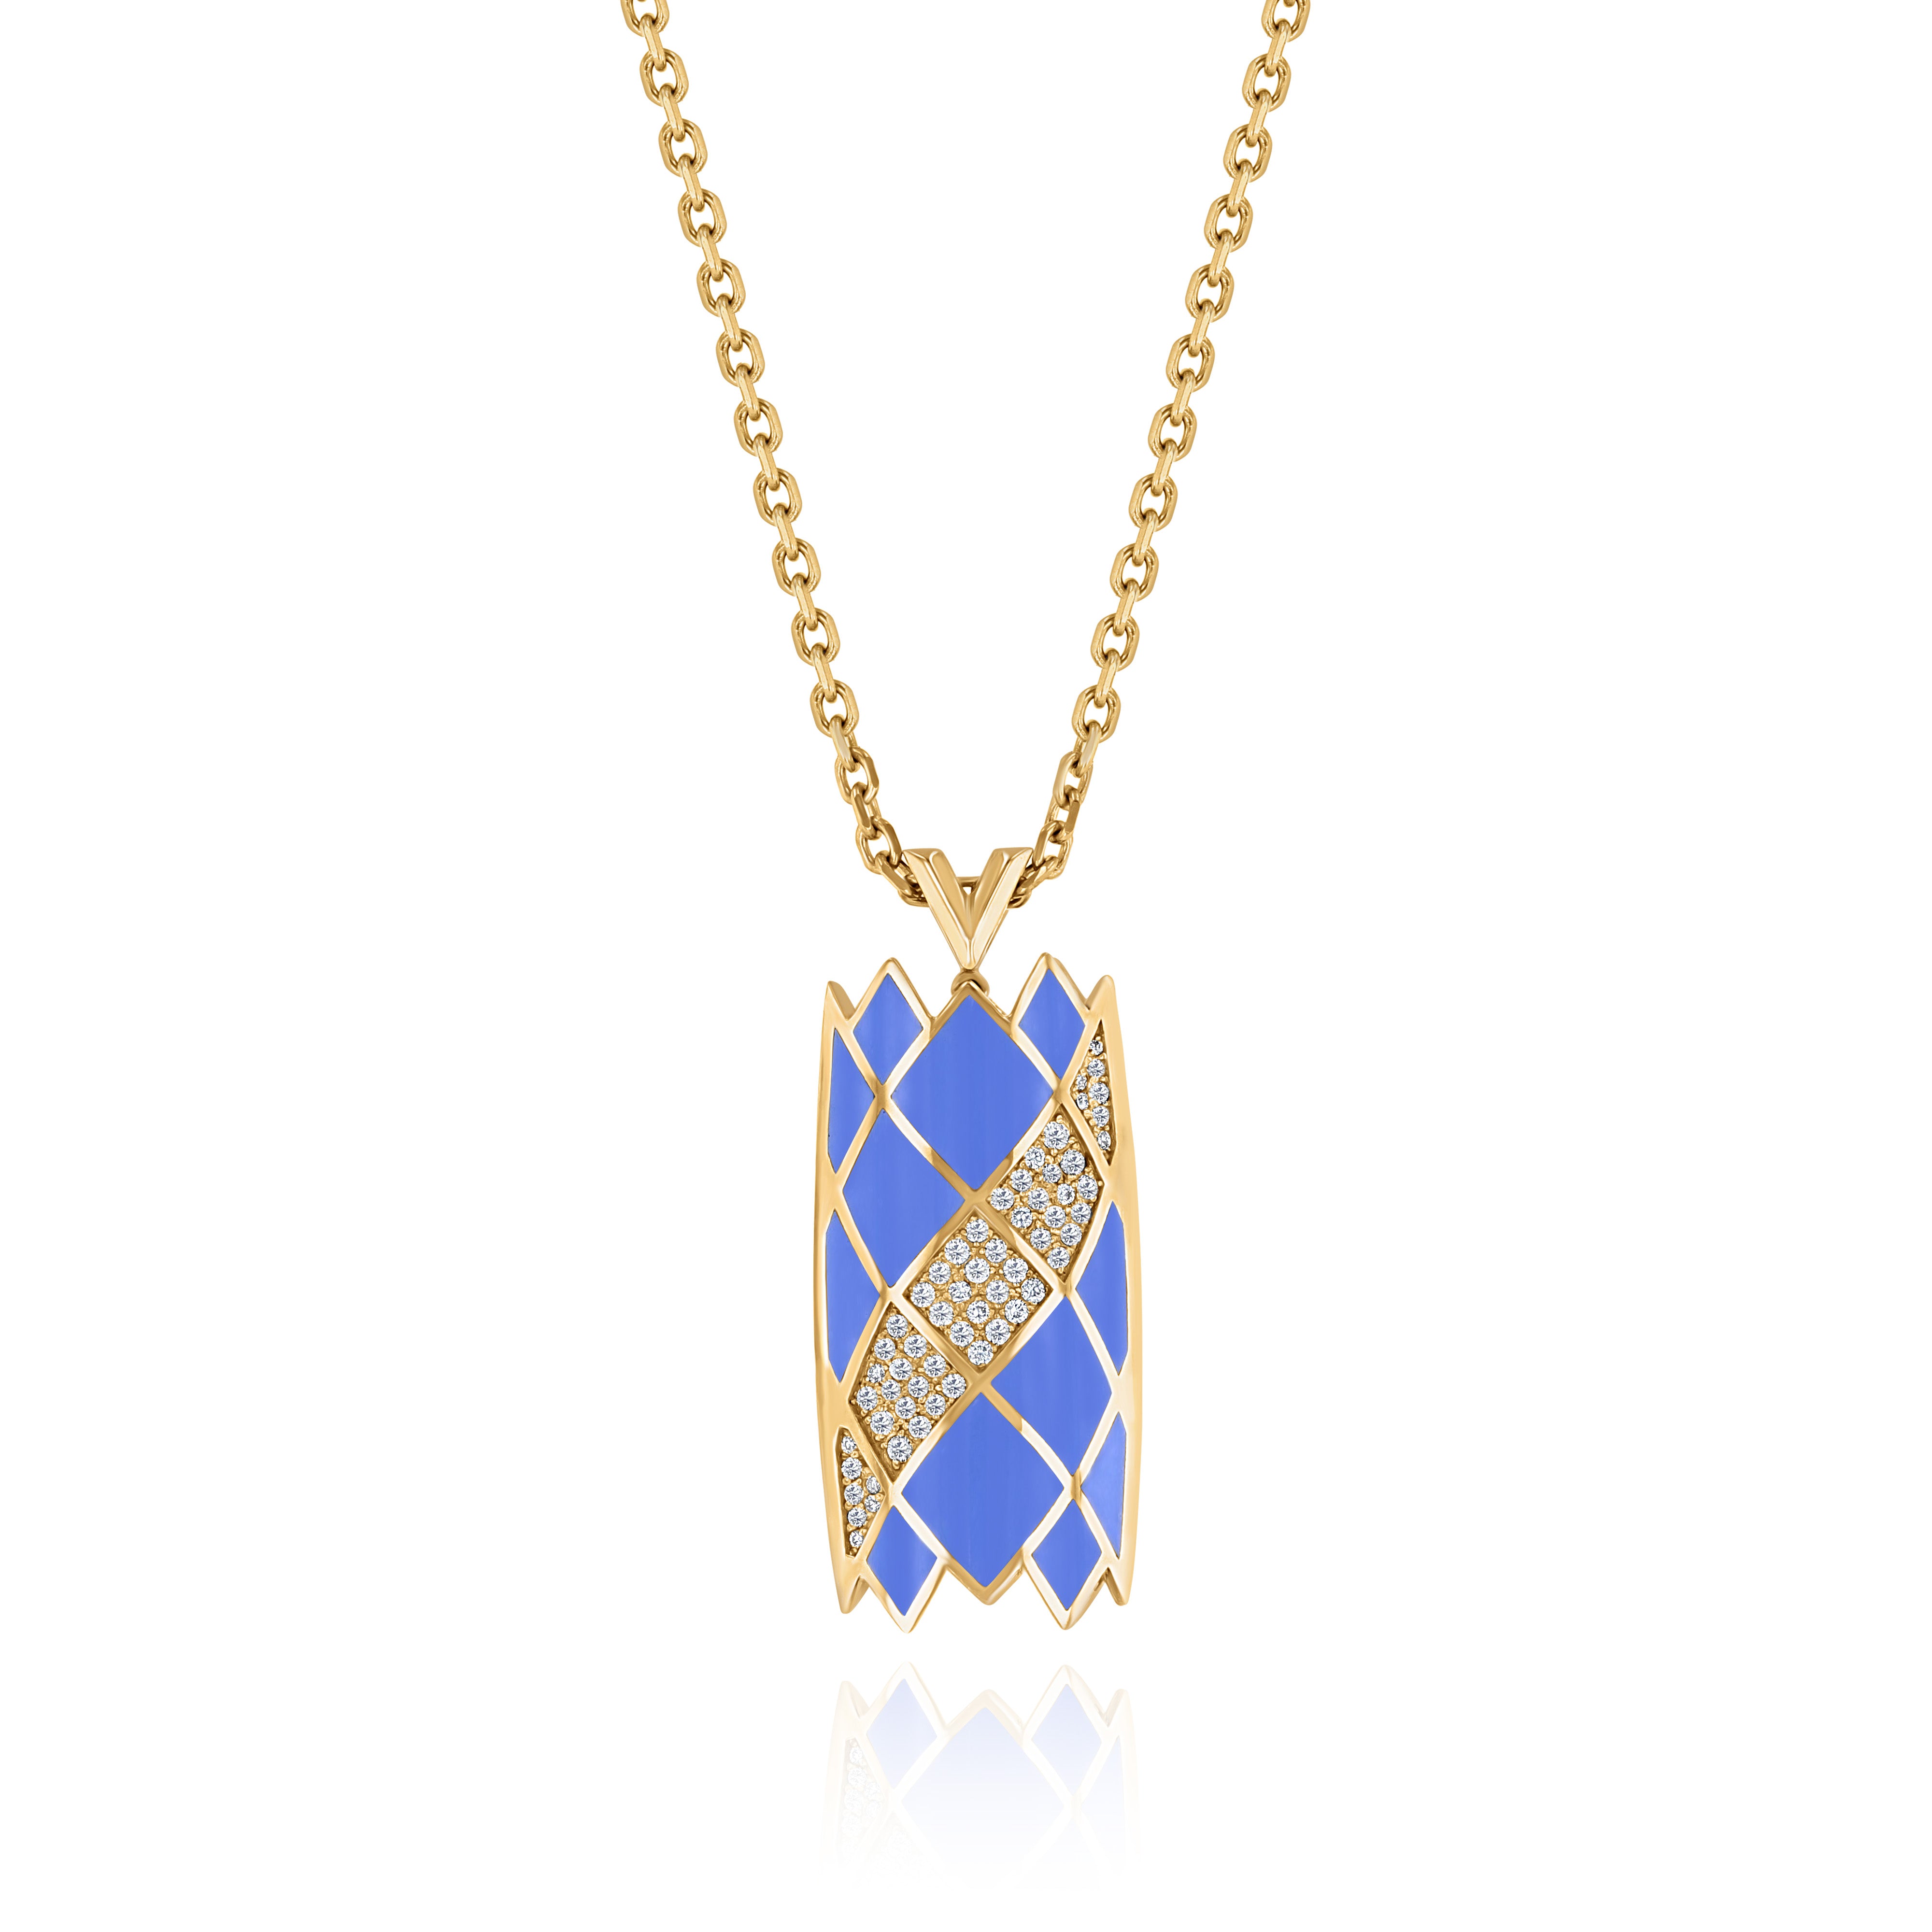 Yellow Gold Necklace with patterned Light Blue Cloisonne and small round Diamonds, Medium